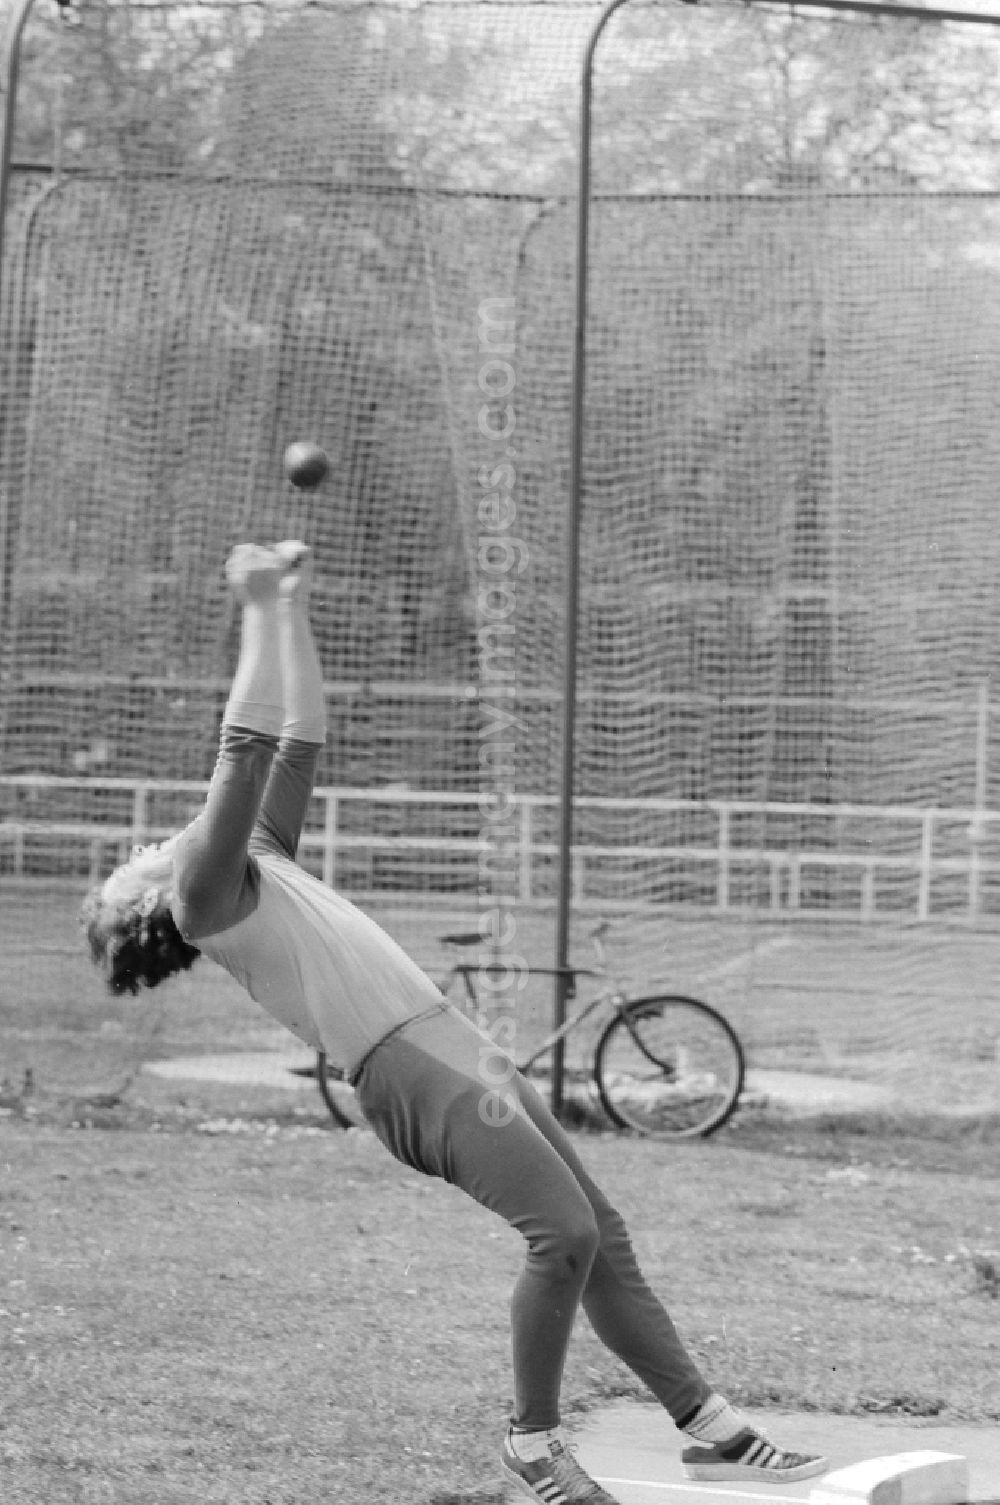 GDR photo archive: Potsdam - The javelin thrower / Athlete Uwe Hohn in Potsdam in Brandenburg on the territory of the former GDR, German Democratic Republic. Here in a pub, the hammer throw